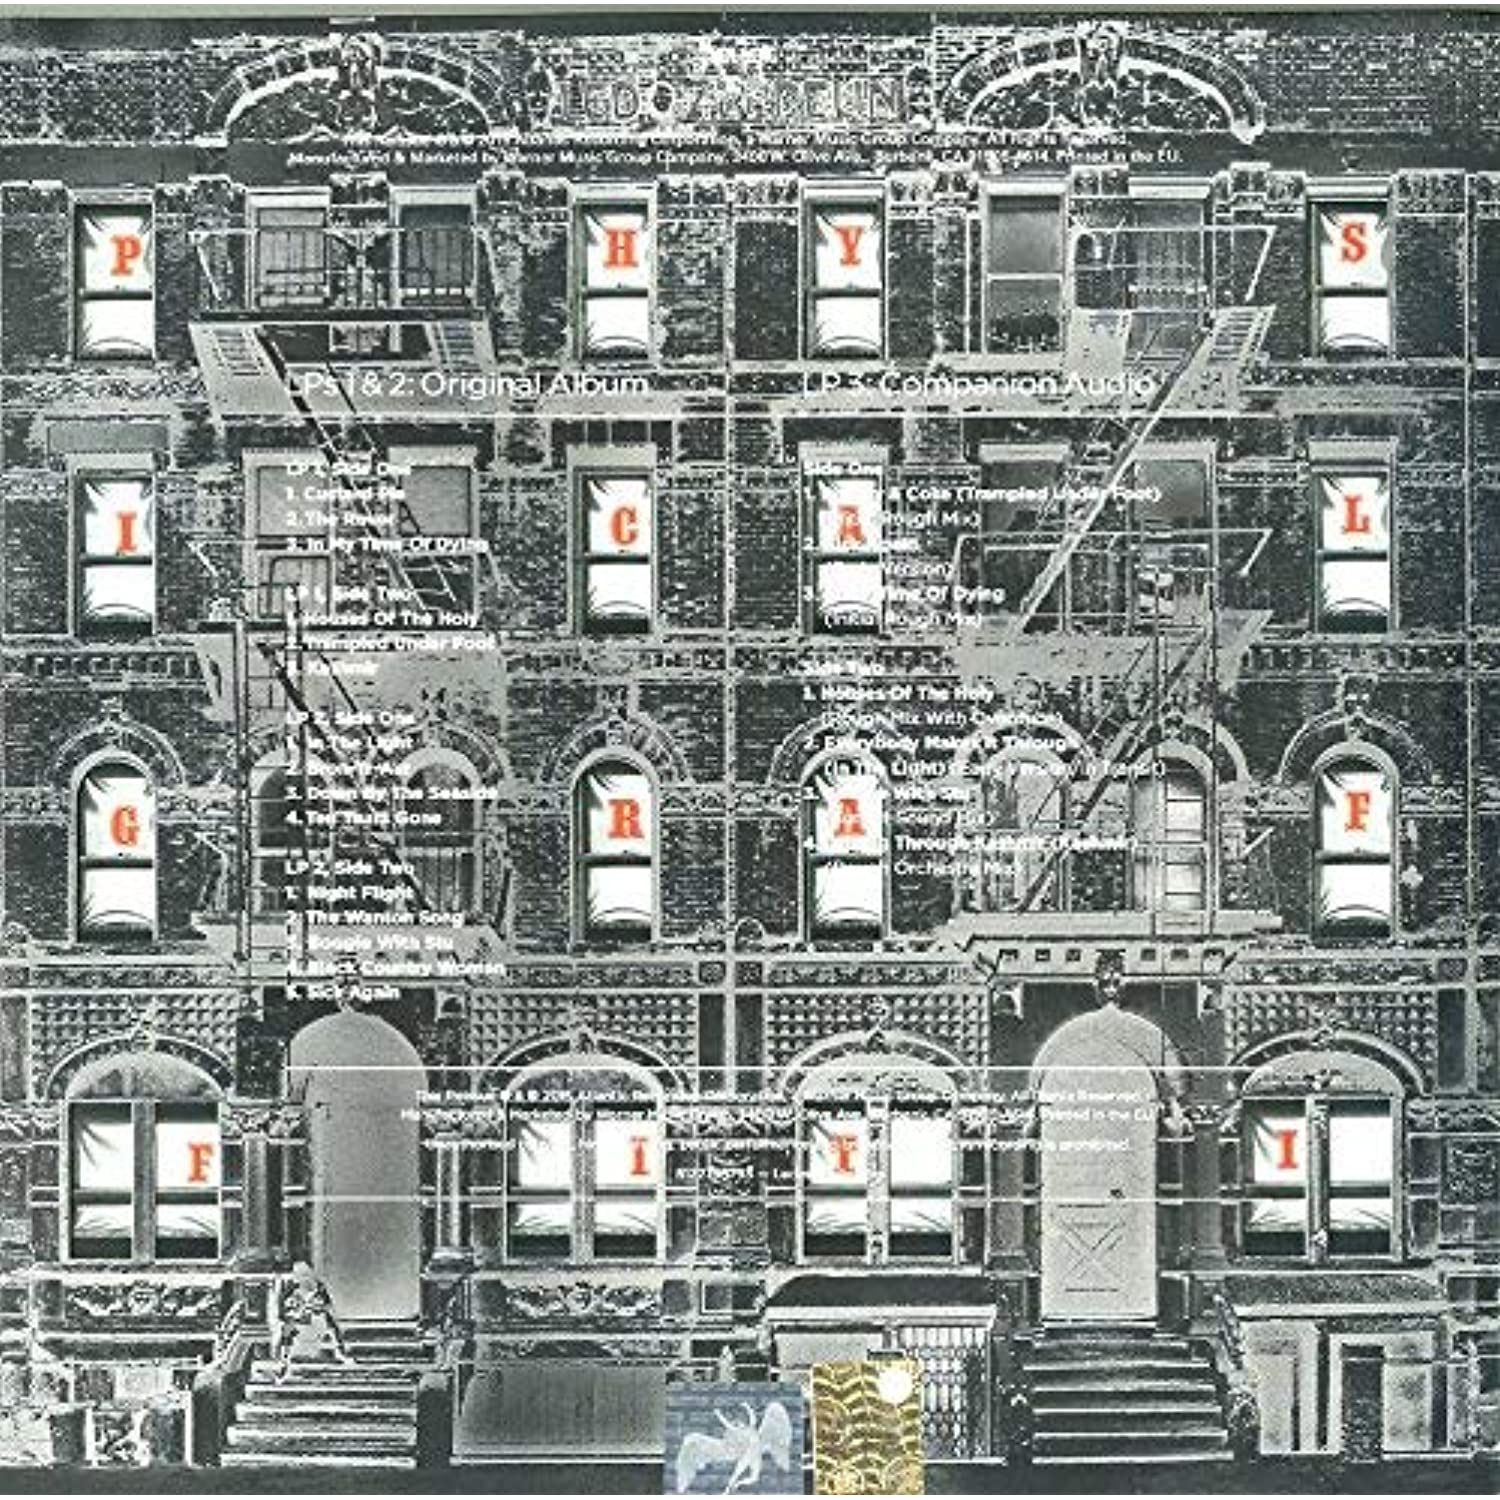 Deluxe Physical Graffiti Record Set